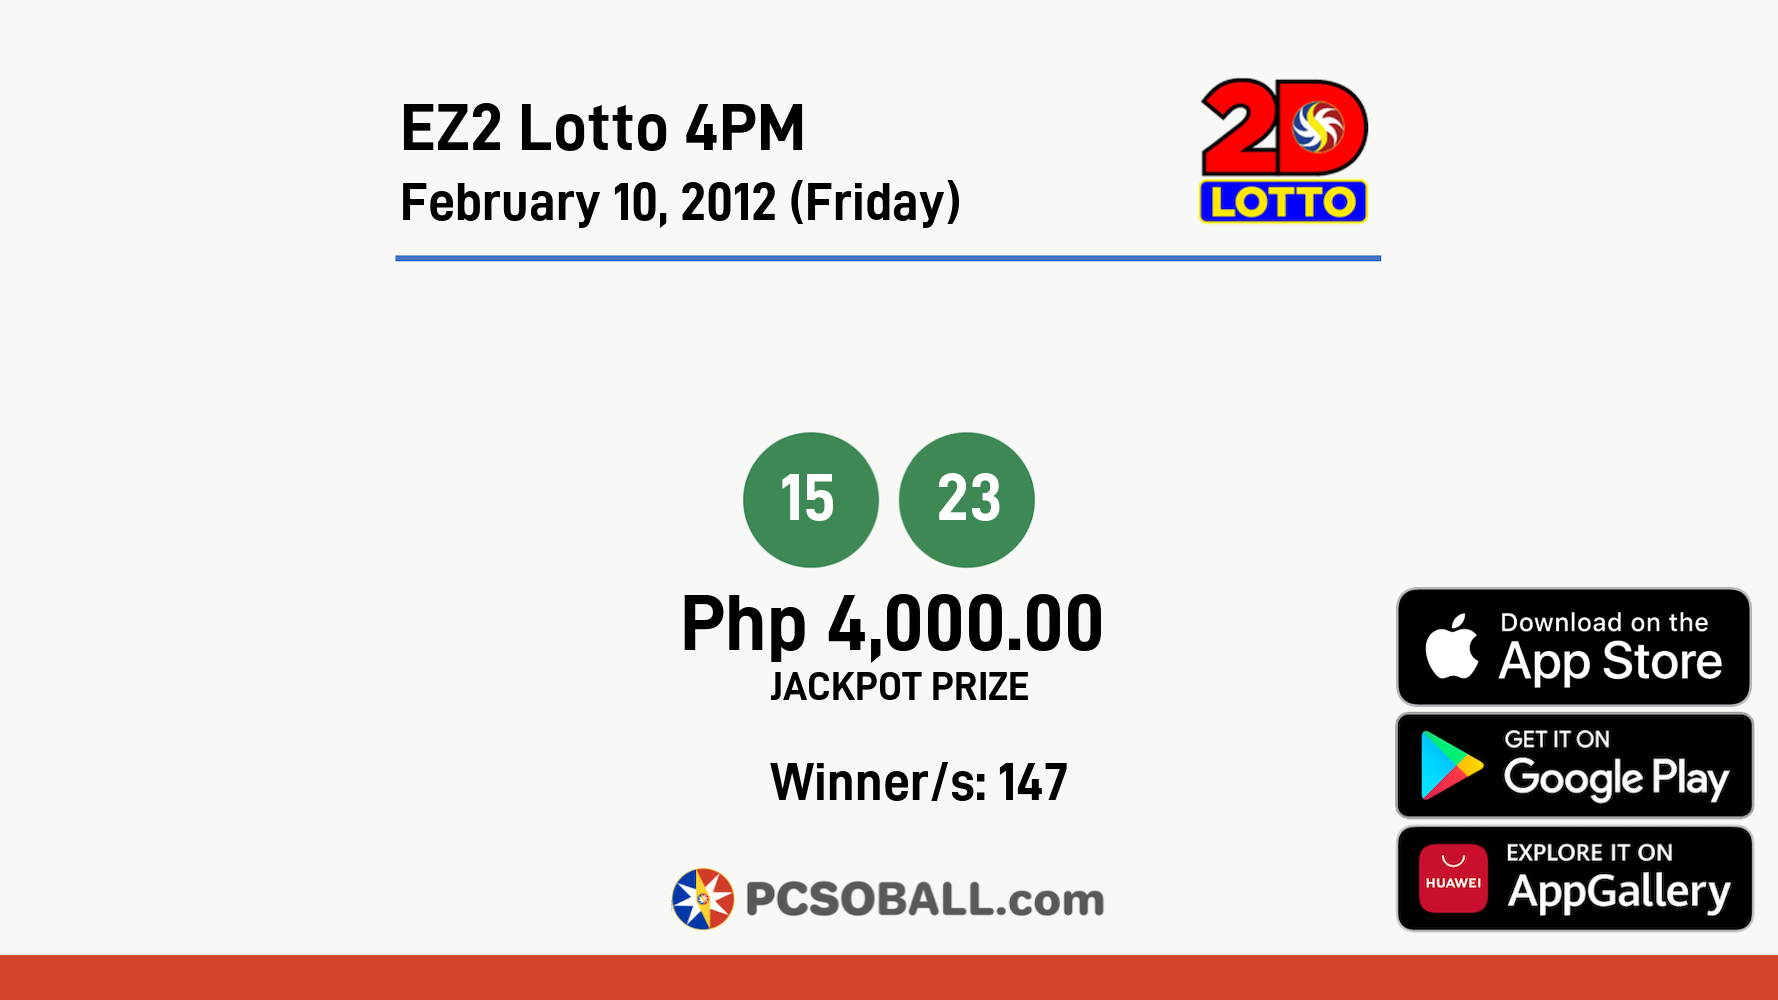 EZ2 Lotto 4PM February 10, 2012 (Friday) Result